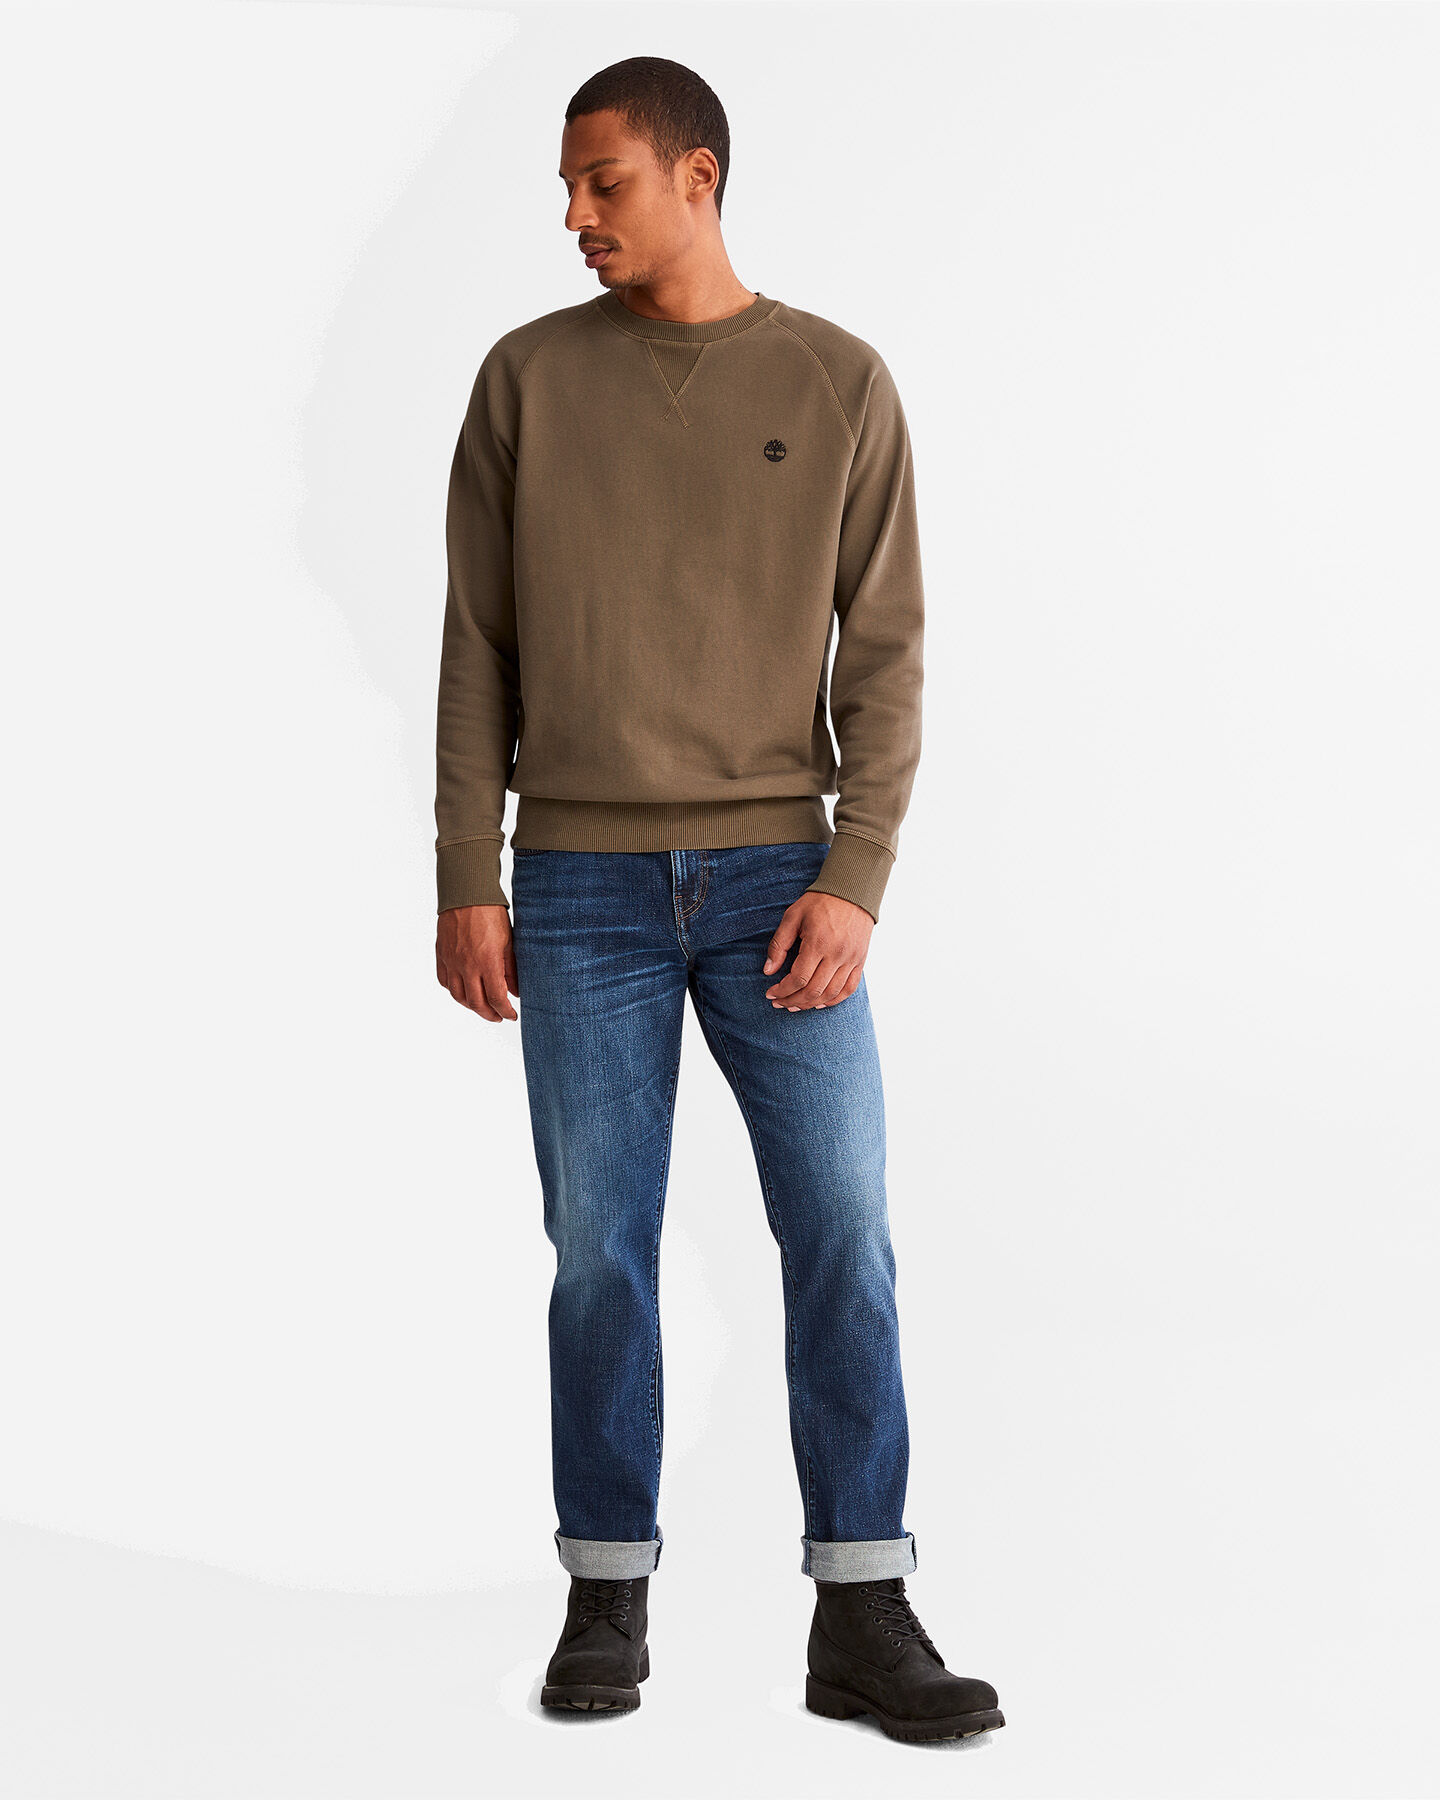  Felpa TIMBERLAND EXETER RIVER M S4104750|A581|XXL scatto 4